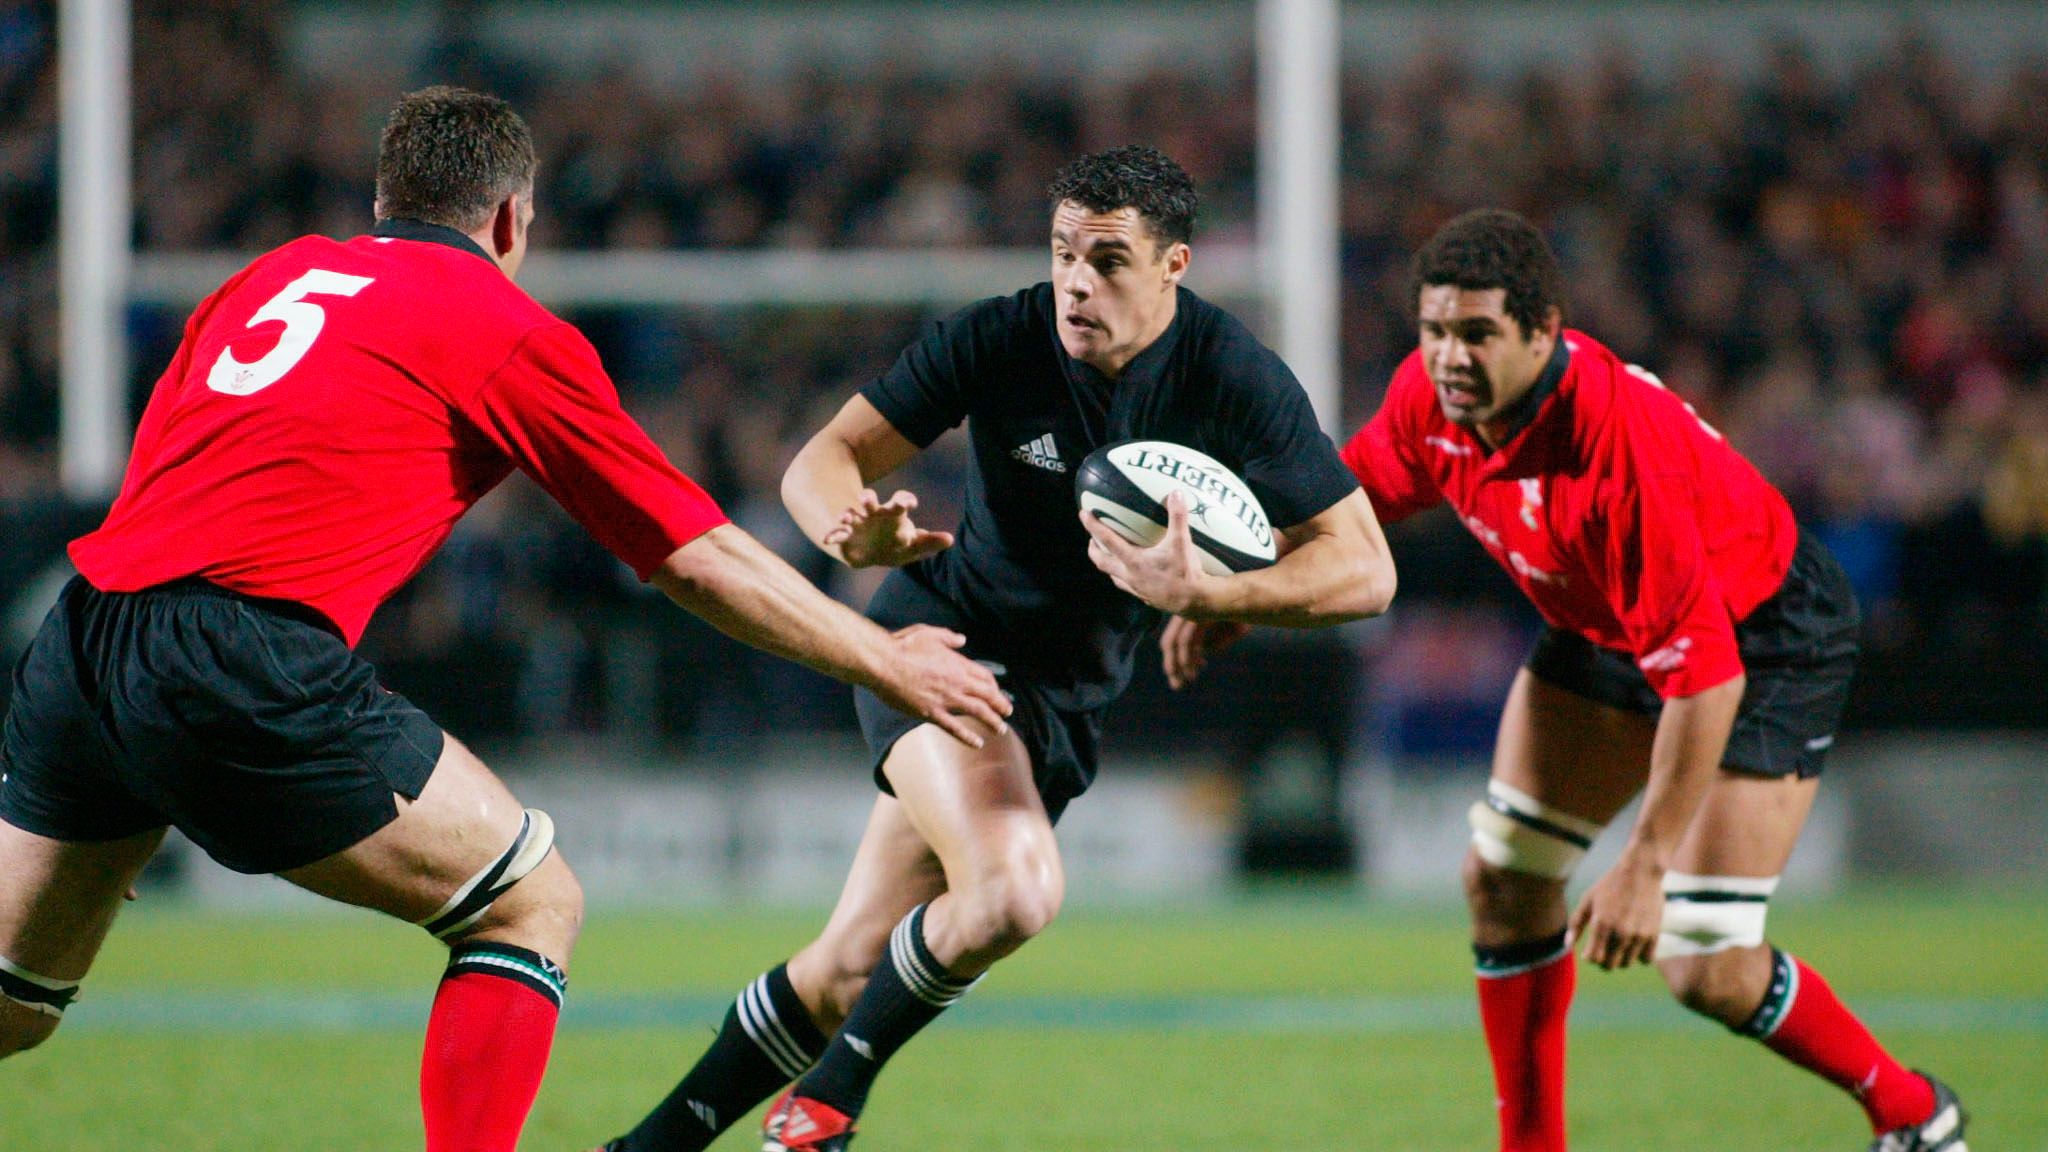 Dan Carter: 'The future will always be bright in New Zealand rugby